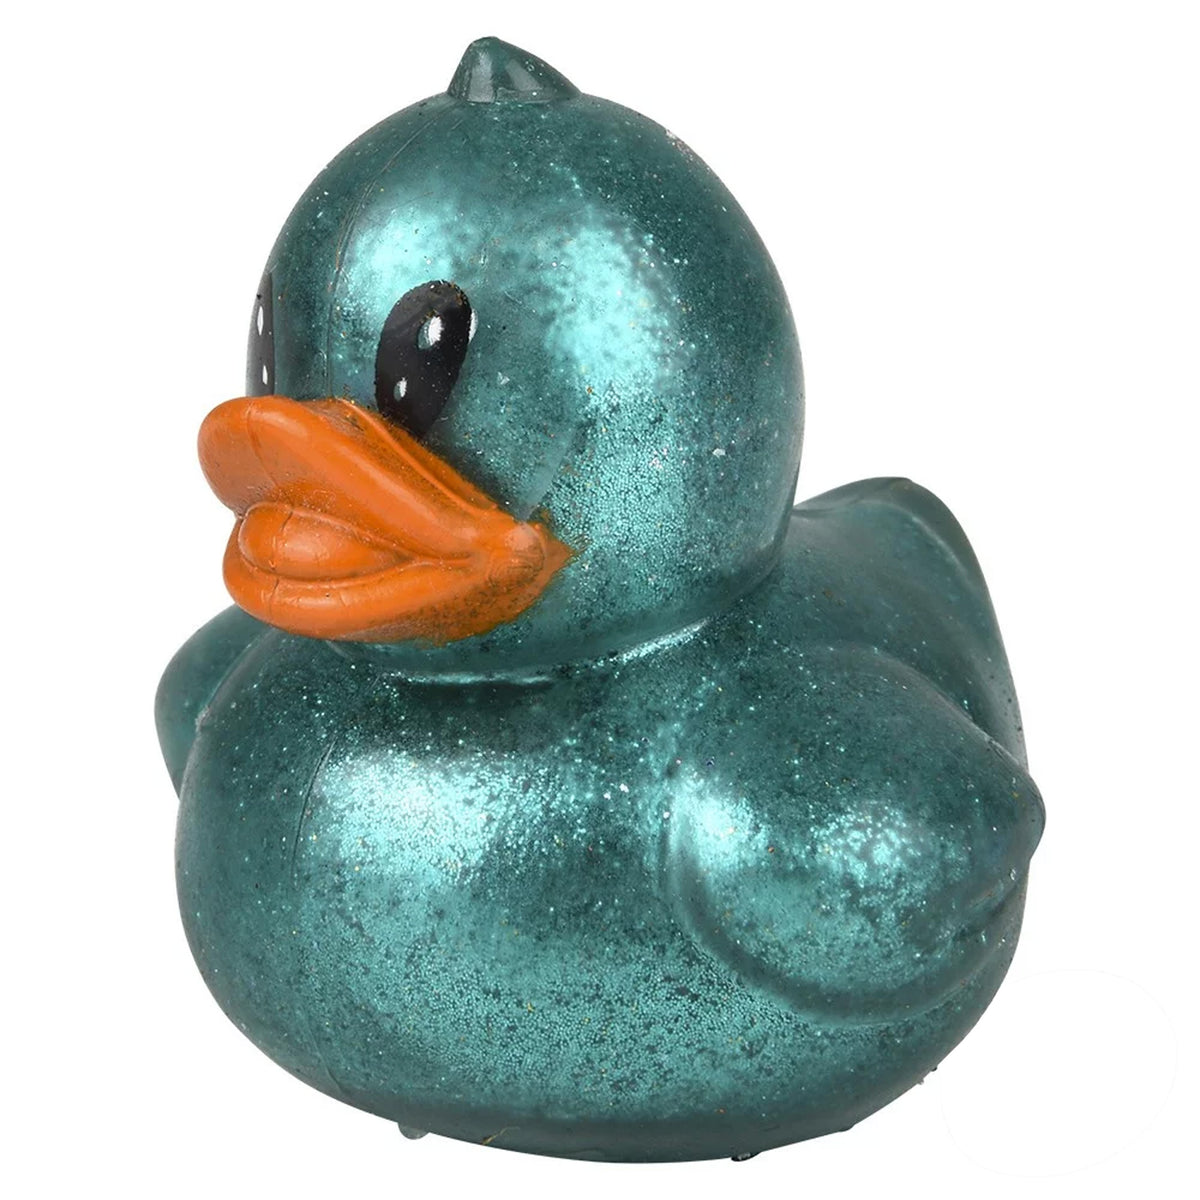 Squishy & Sticky Duck Kids Toys In Bulk - Assorted